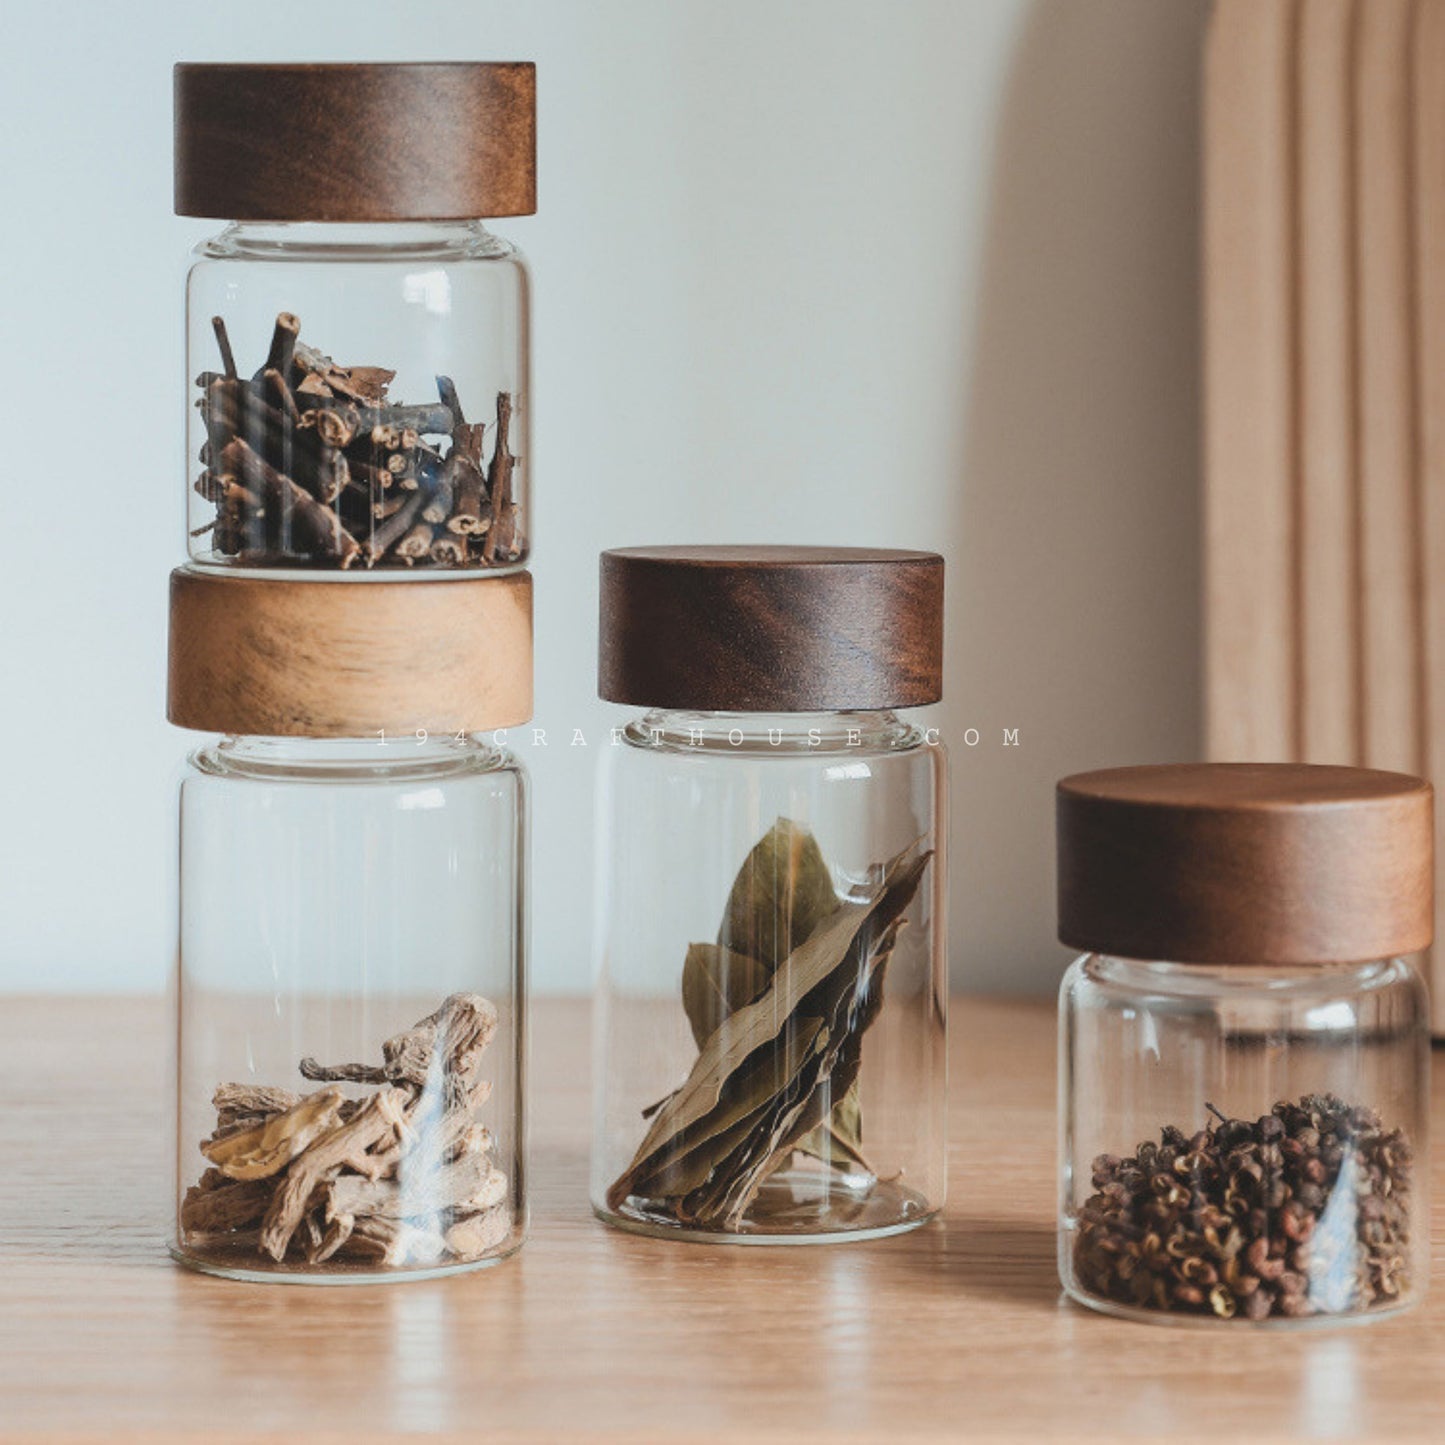 7oz Small Spice Jar With Engraved Lid - Drawer Storage